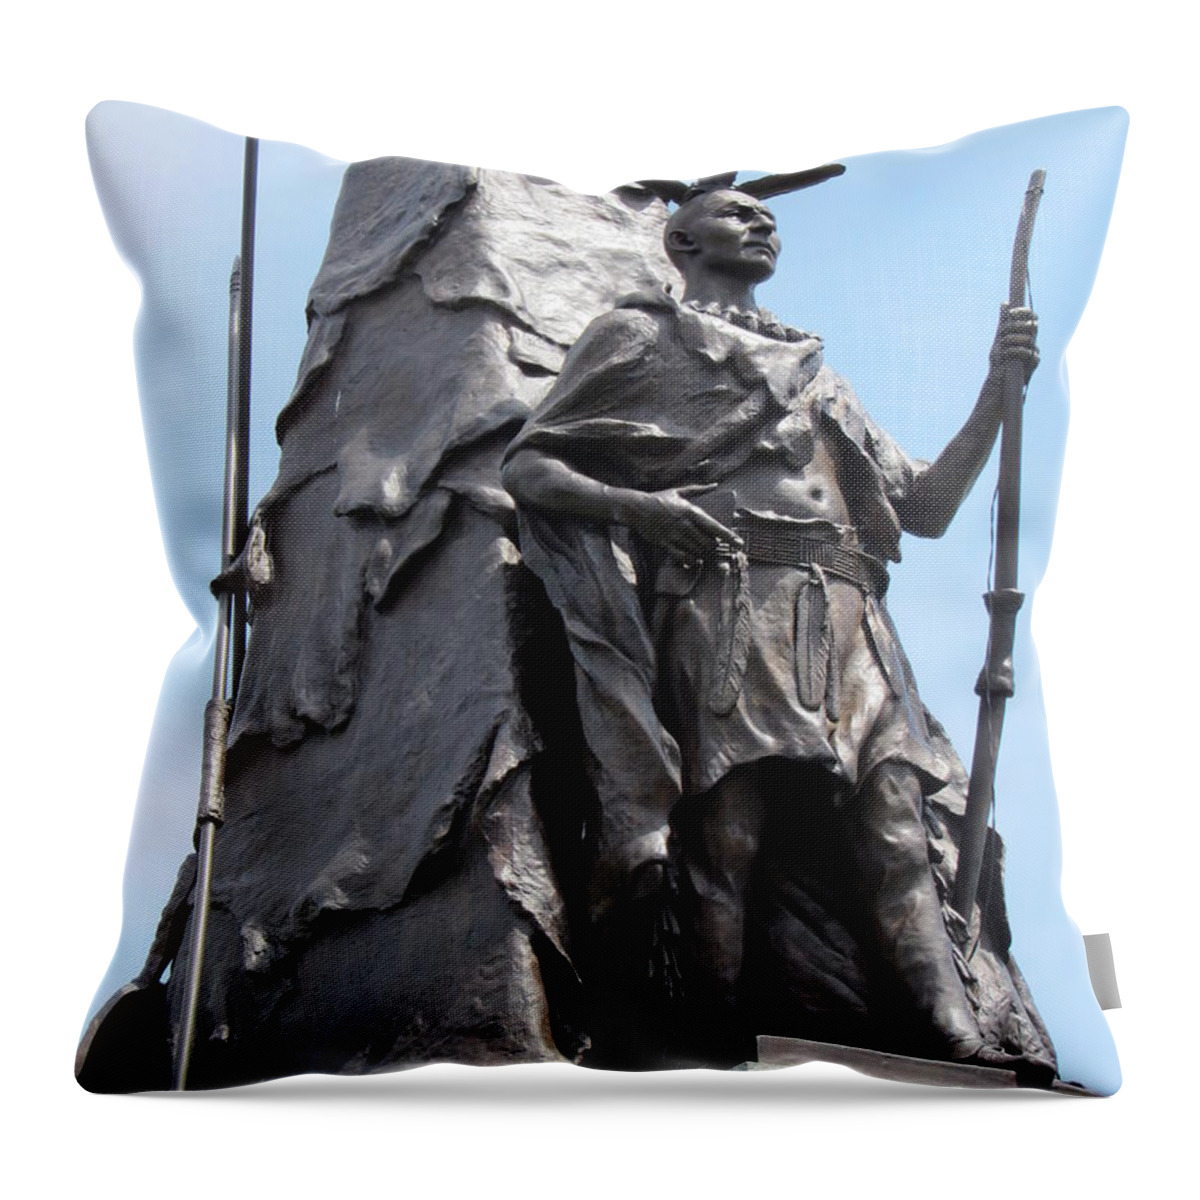 Gettysburg Throw Pillow featuring the photograph Gettysburg - New York Infantry by Susan Carella